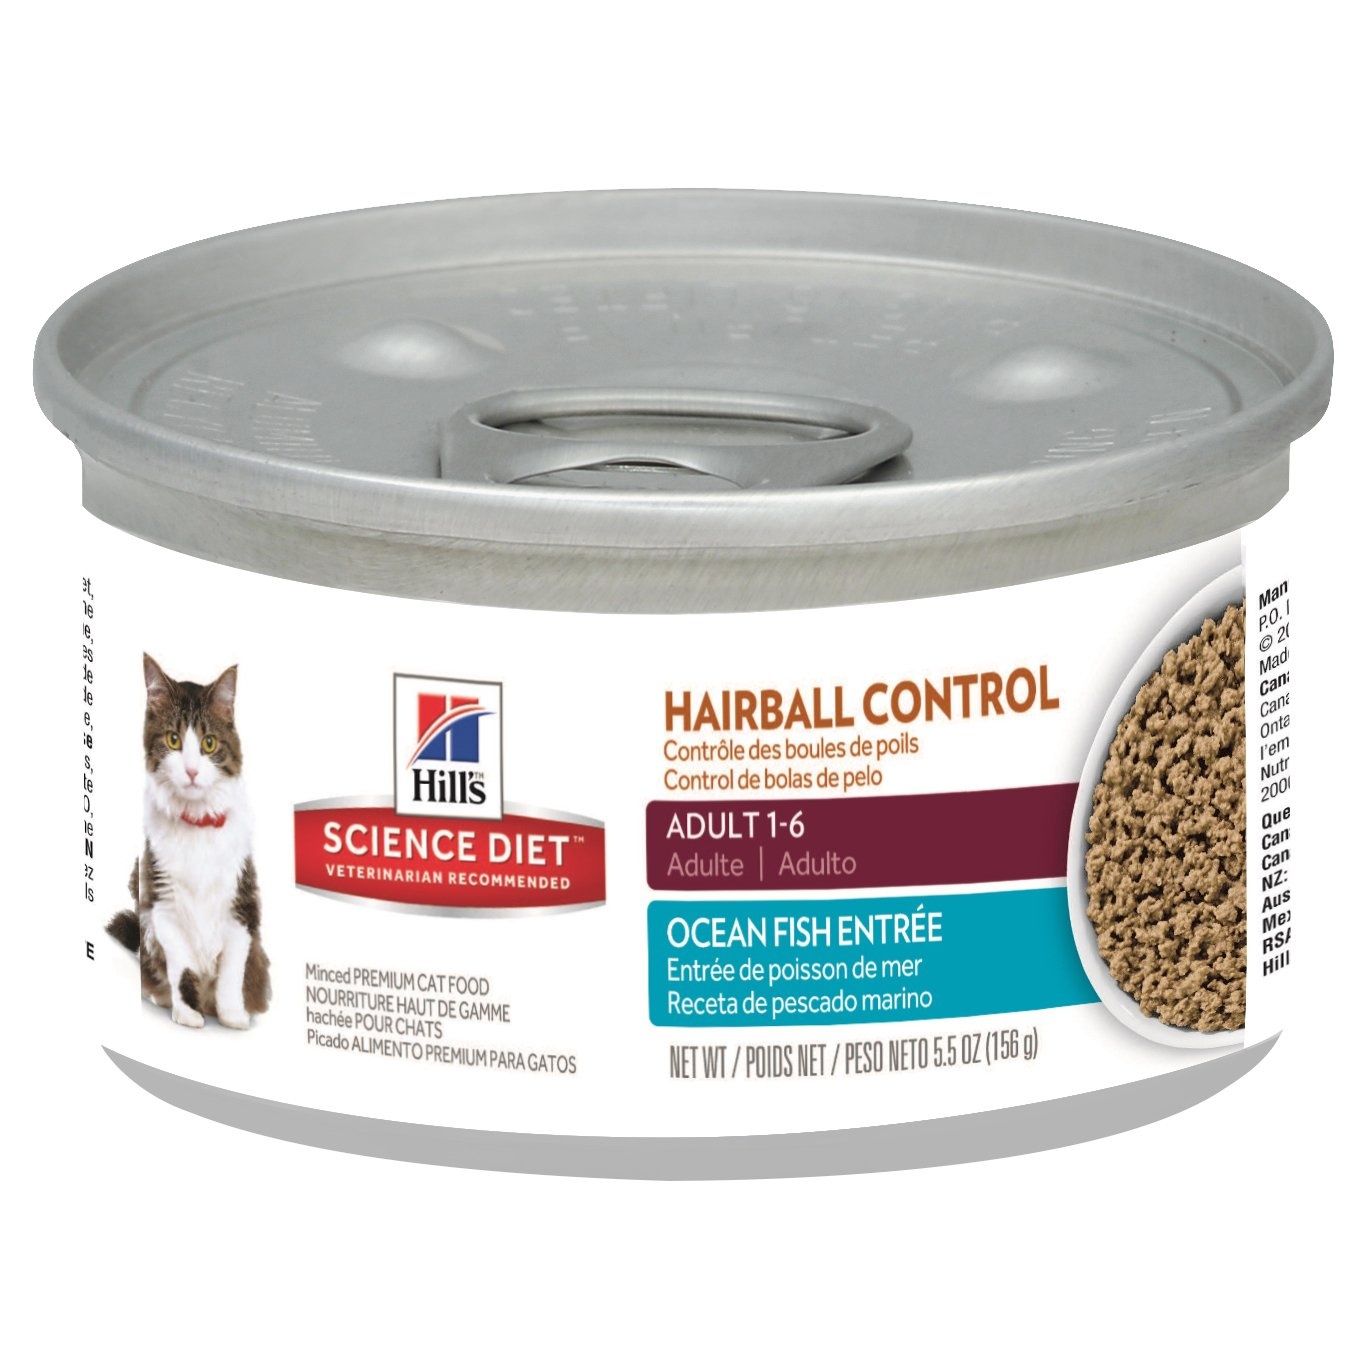 Hill's Science Diet Adult Hairball Control Savory Seafood Entree Canned